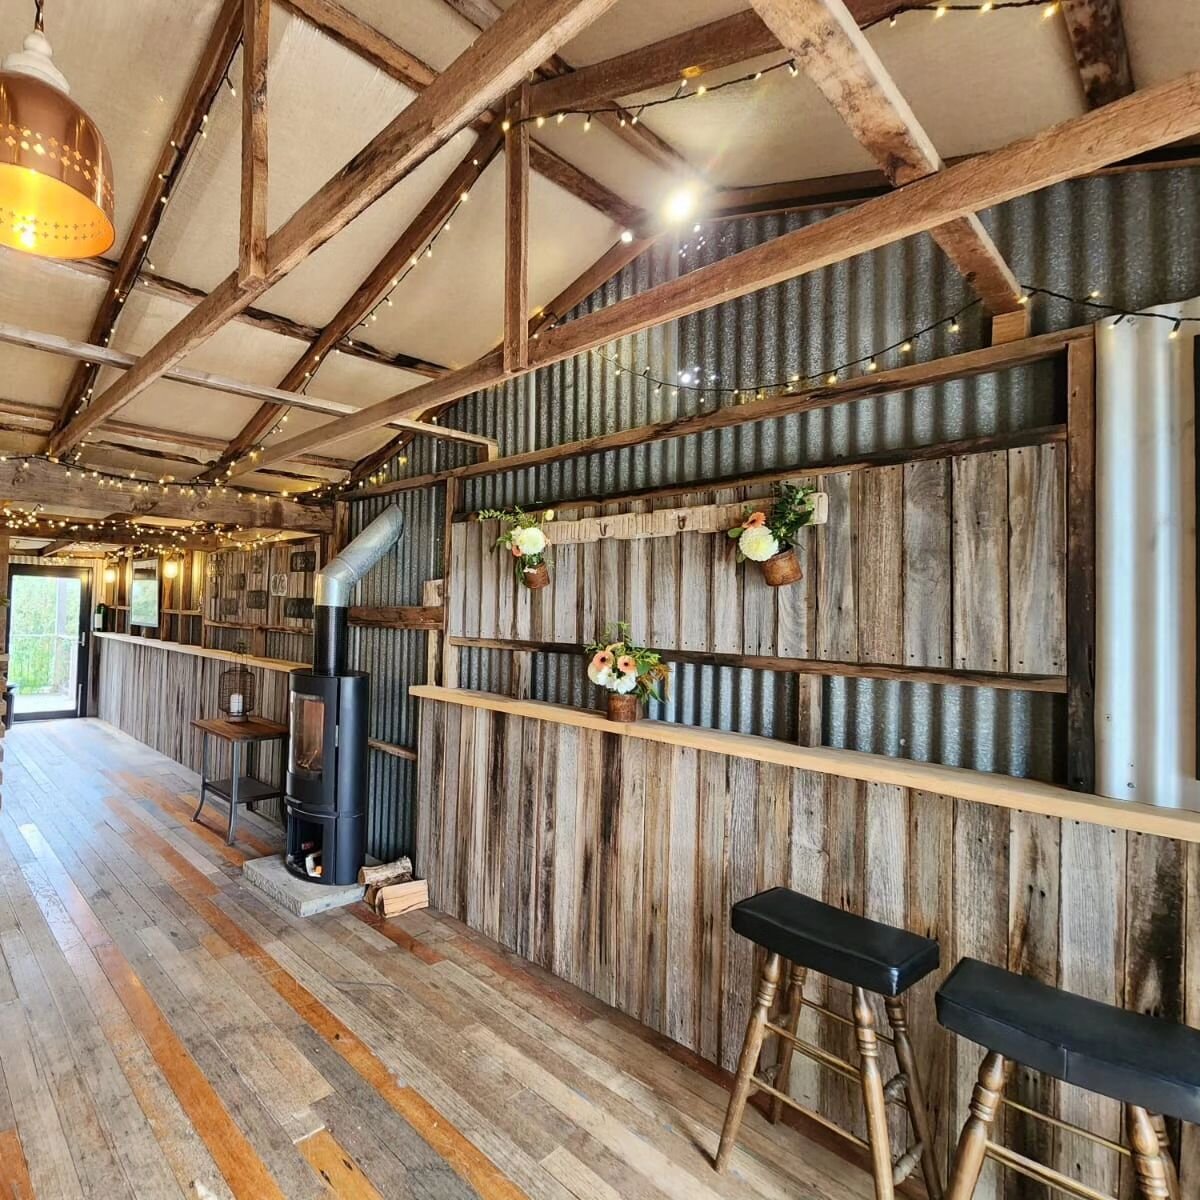 || The Shearing Shed ||
Our Shearing Shed is the perfect place for a small intimate #winterwedding or #elopement 
Contact us for more information 
campdavidfarm@gmail.com